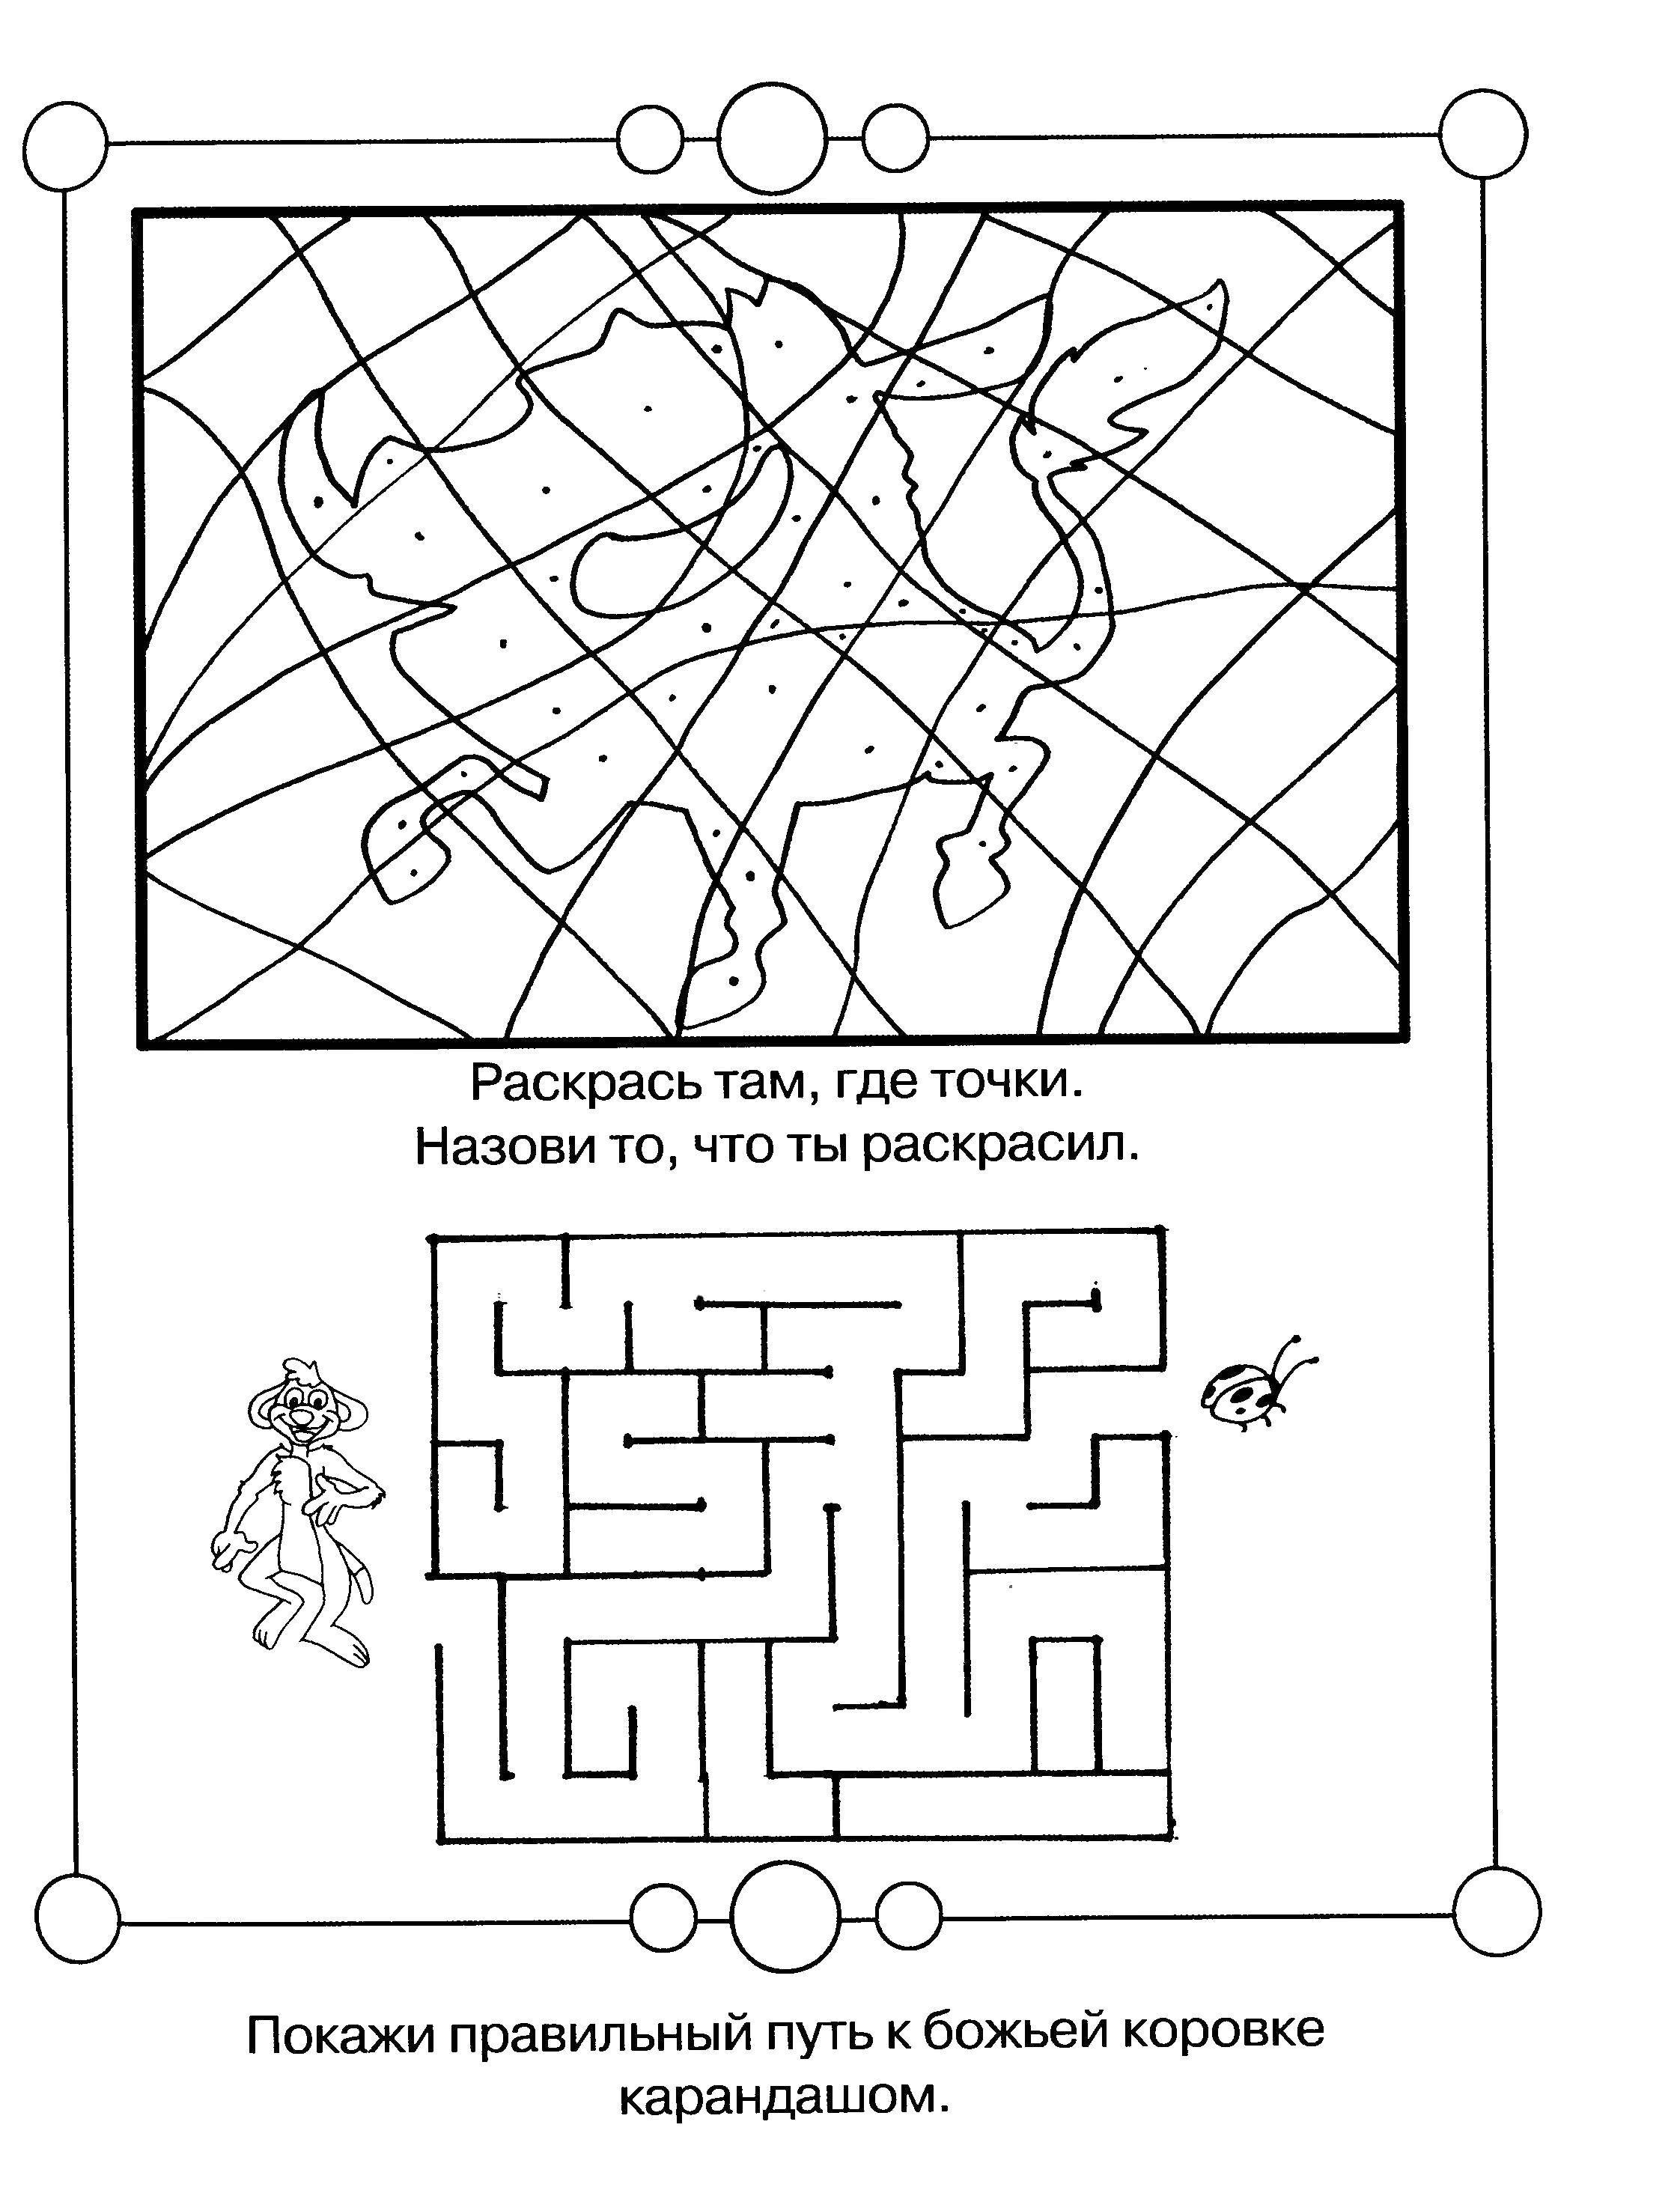 Coloring Specify the right path. Category riddles for kids. Tags:  Maze, logic.